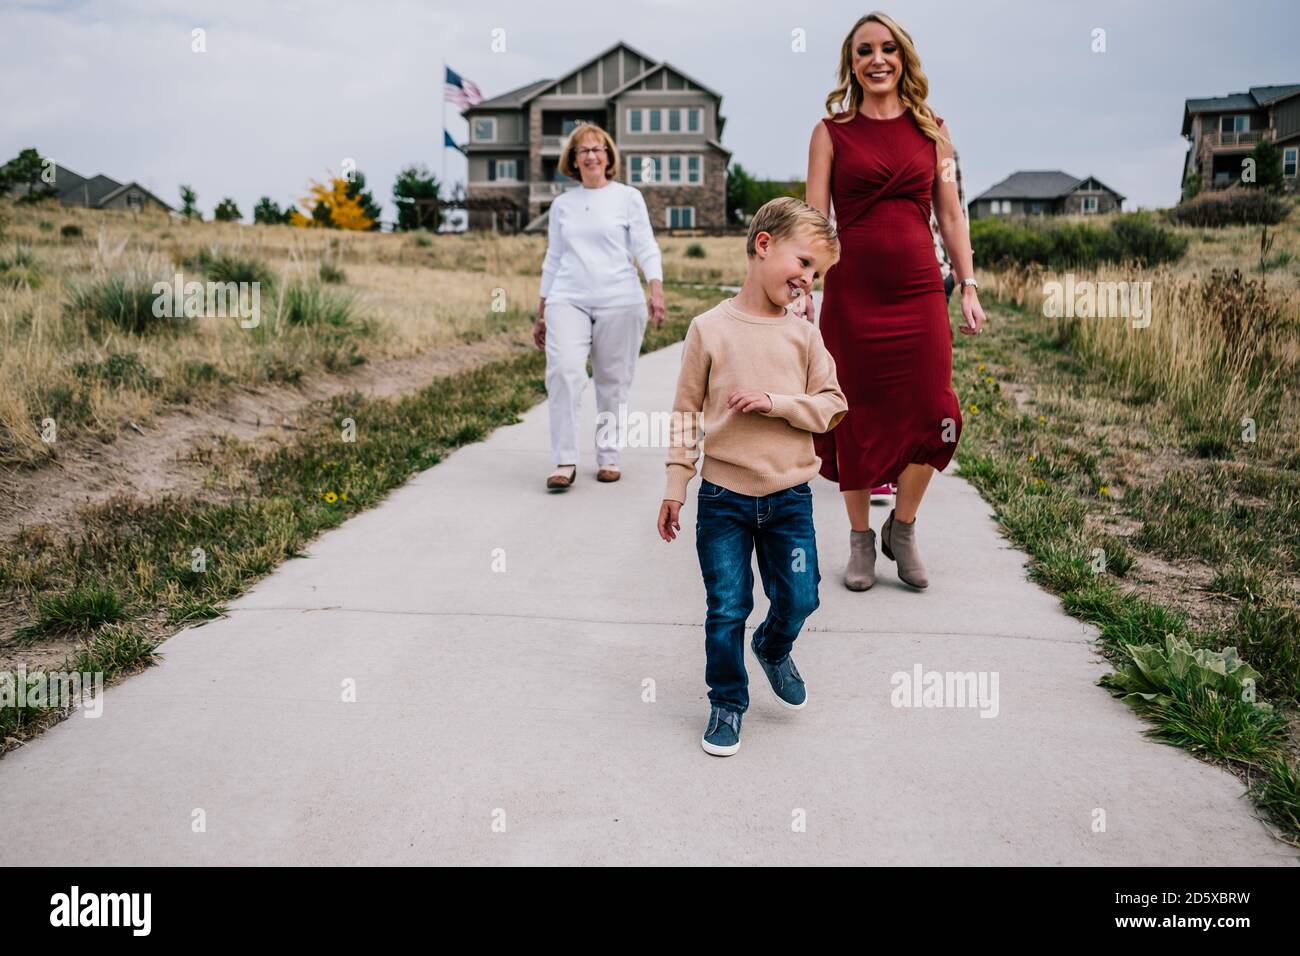 Smiling boy walking with mother and grandmother outside Stock Photo